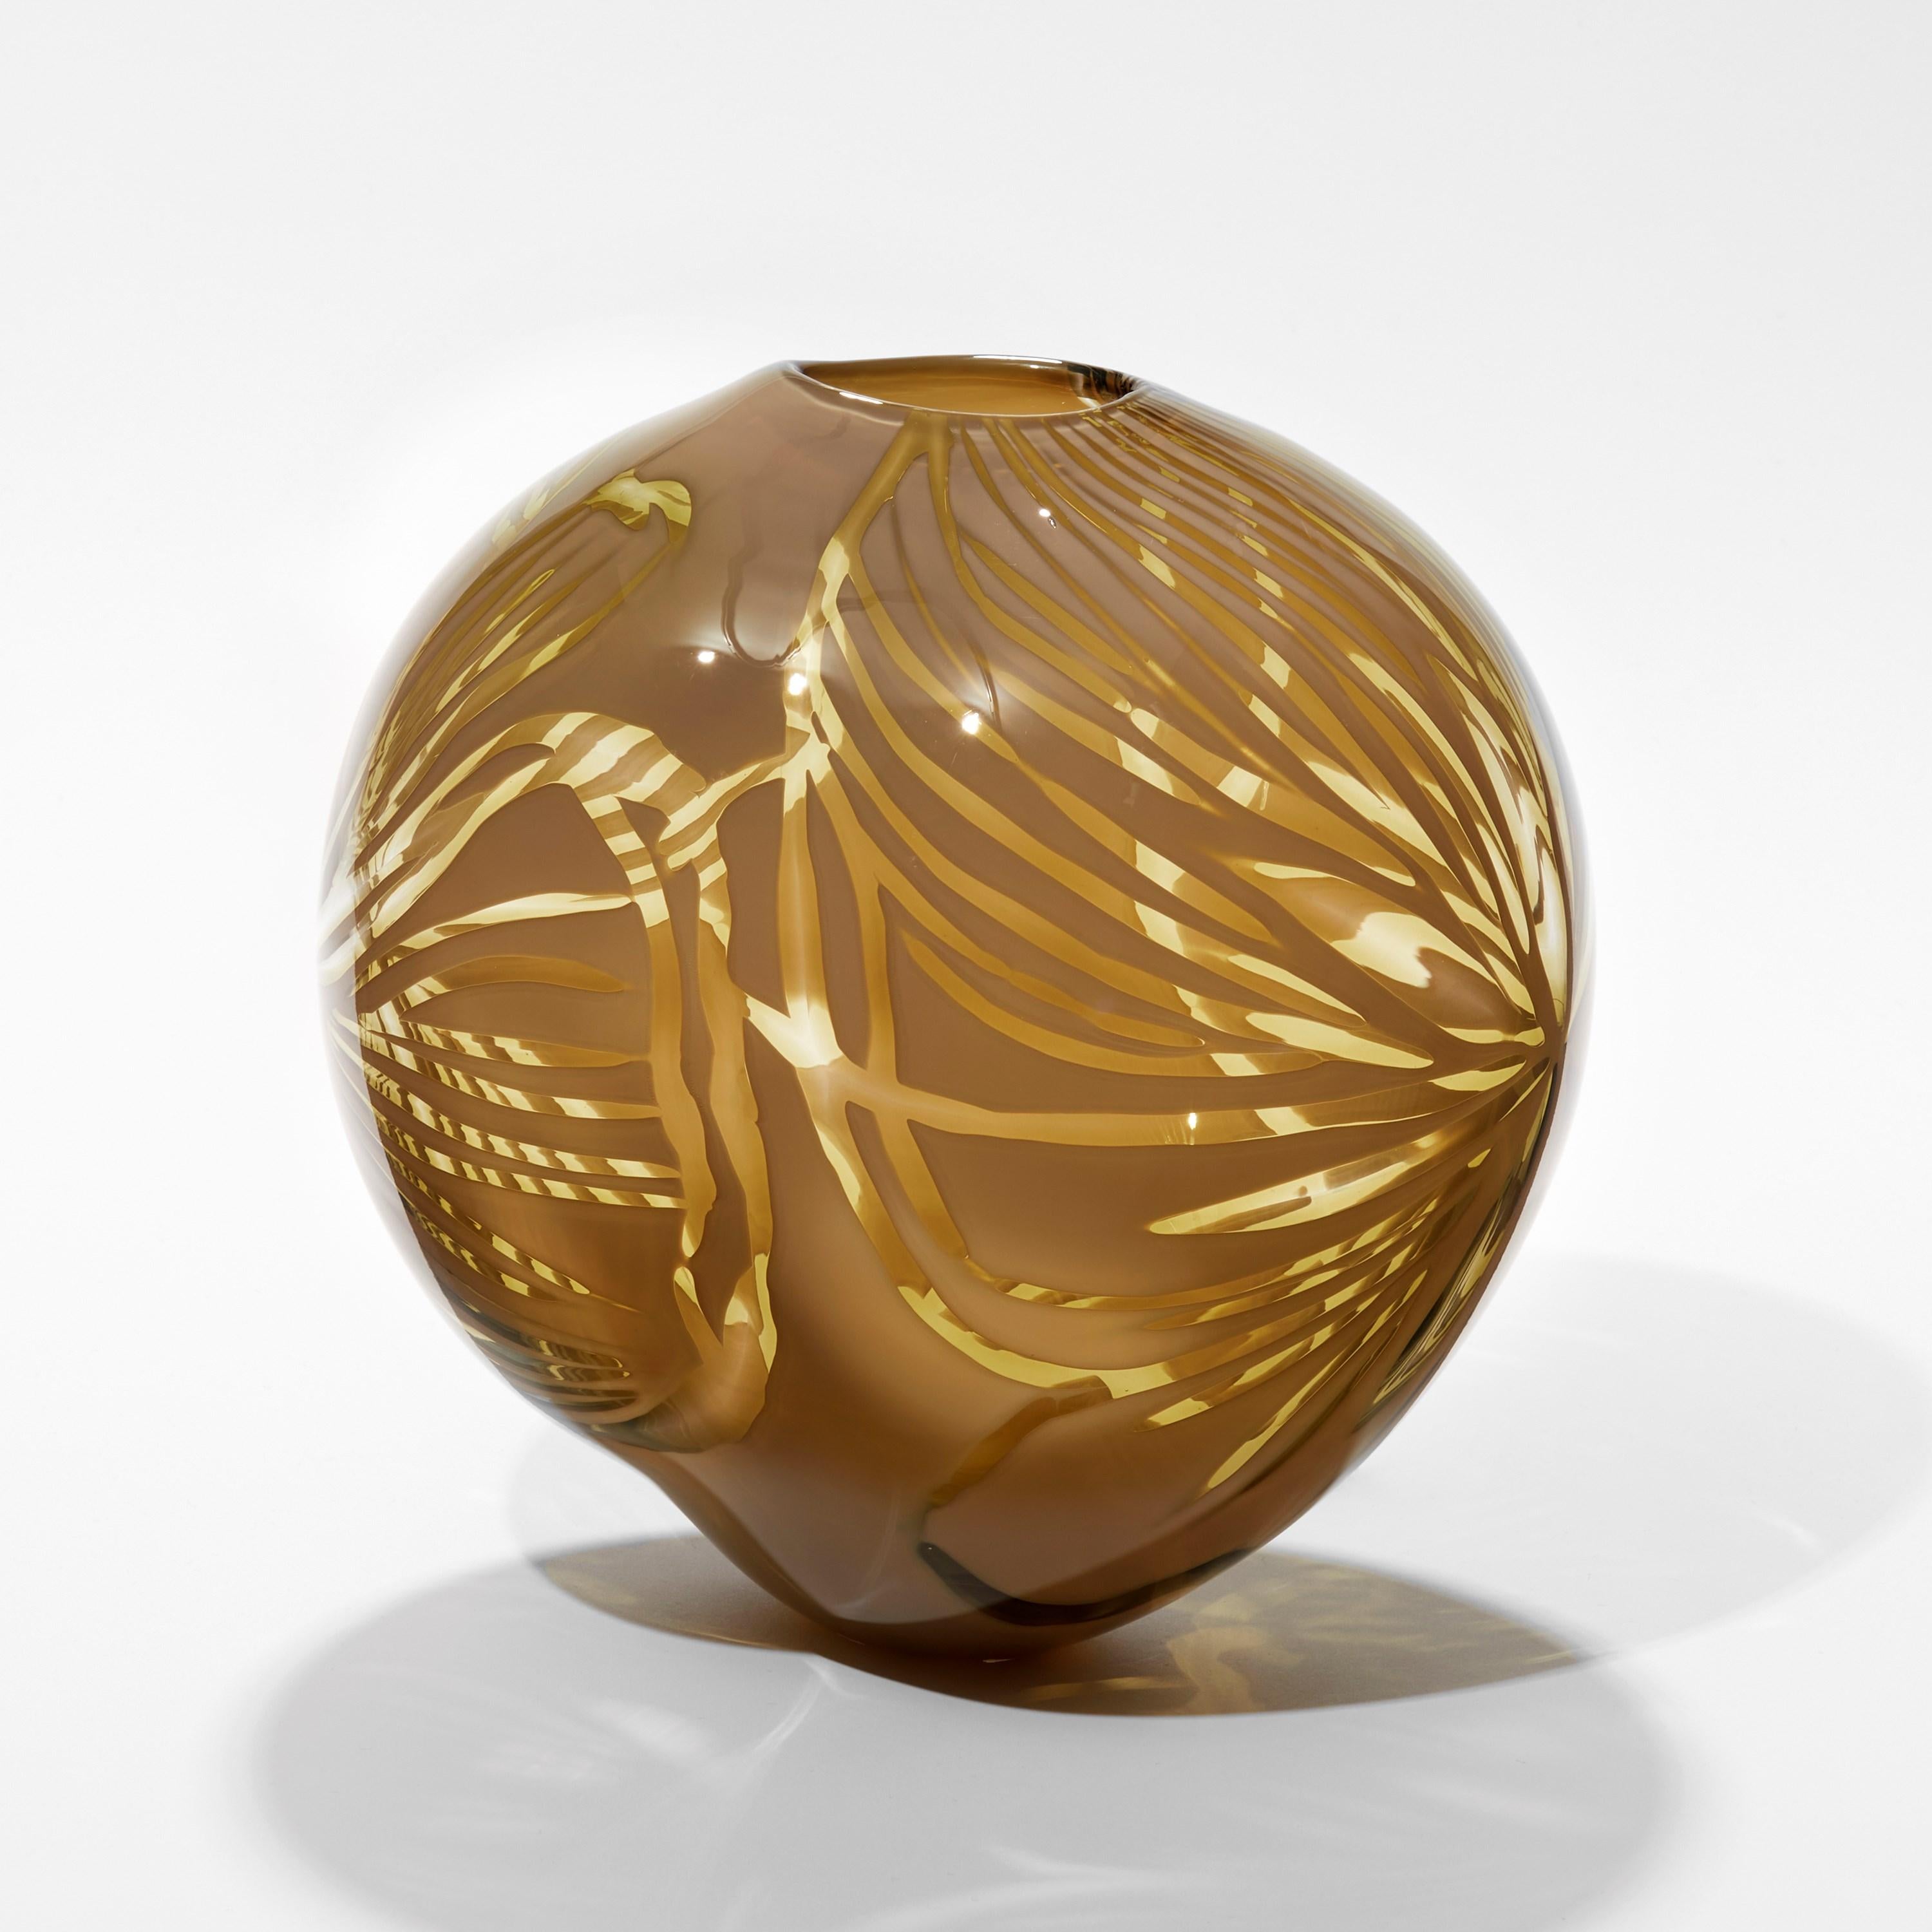 'Mexican Root' is a unique glass artwork by the Canadian artist, Michèle Oberdieck.

Michèle Oberdieck explores balance and asymmetry through colour, form and surface decoration. Presenting her sculptural works as a gesture, an expressive mark,